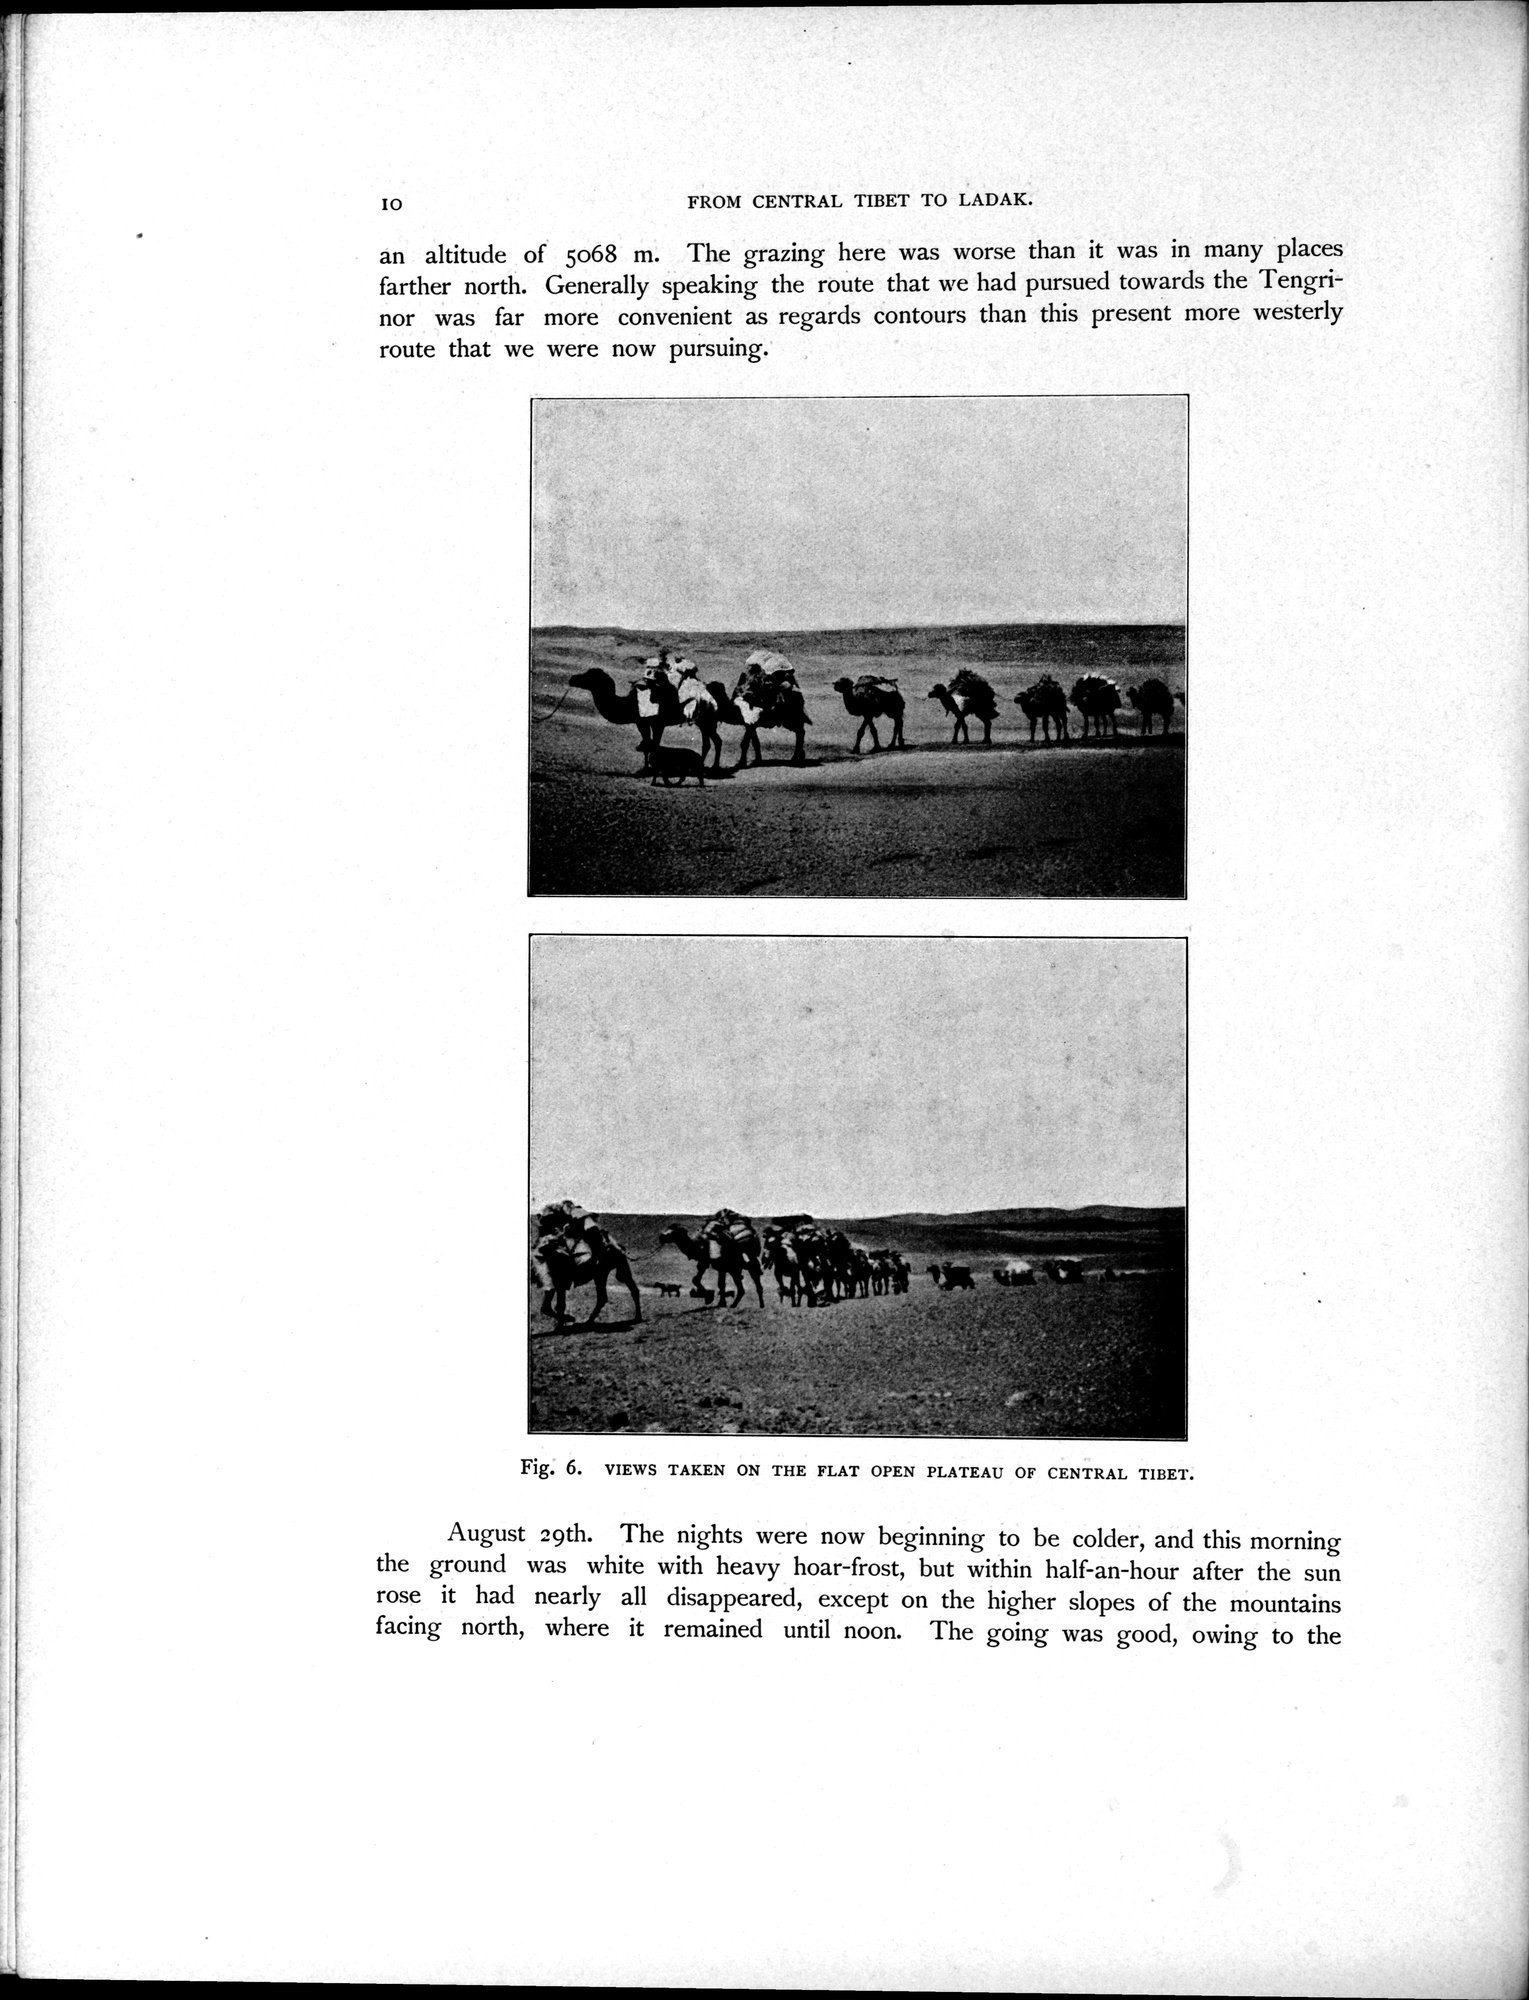 Scientific Results of a Journey in Central Asia, 1899-1902 : vol.4 / 22 ページ（白黒高解像度画像）